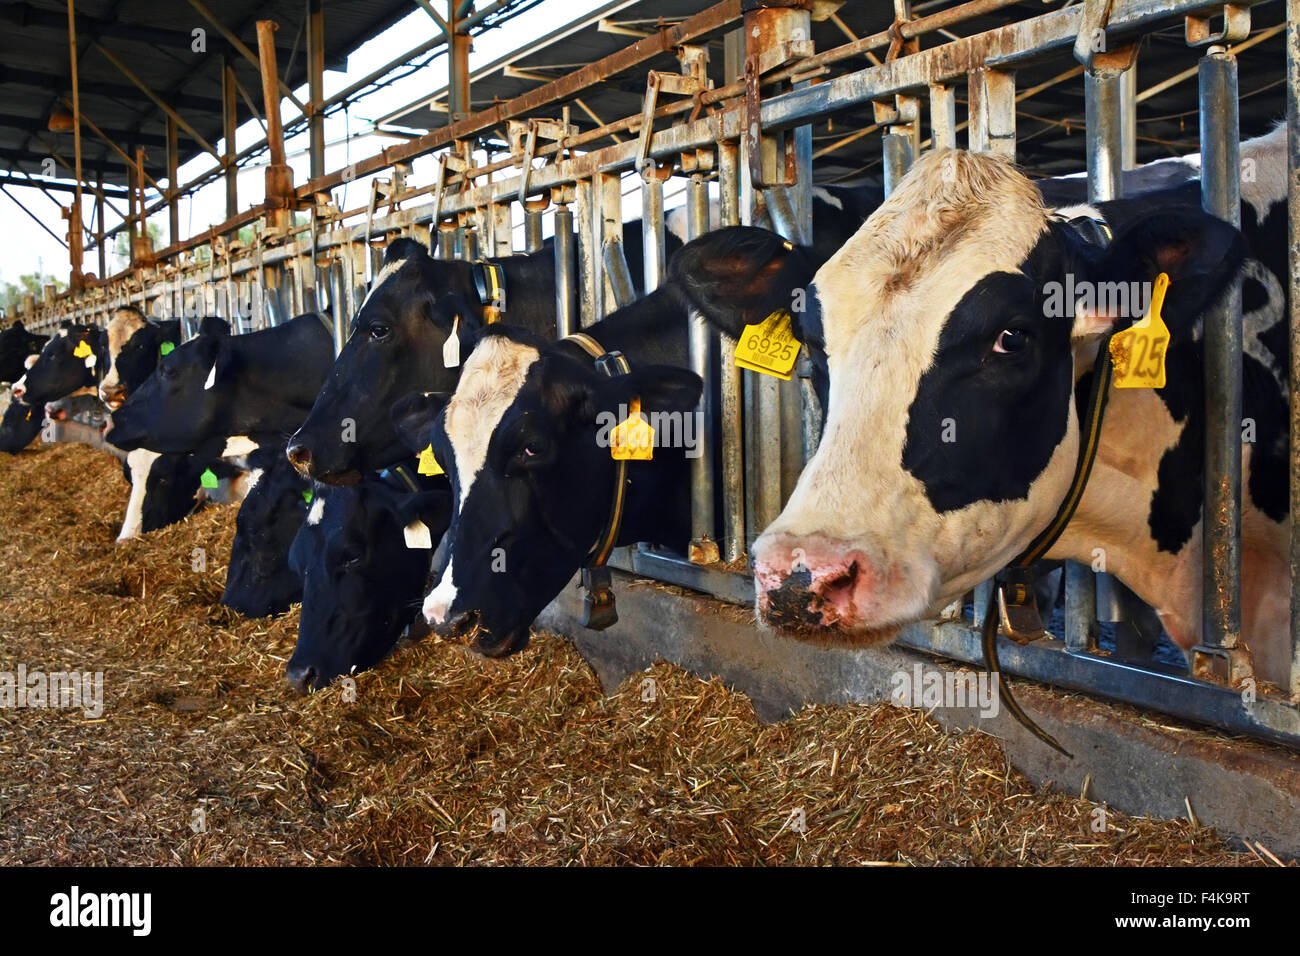 Cows eating in a cow shed Stock Photo, Royalty Free Image 